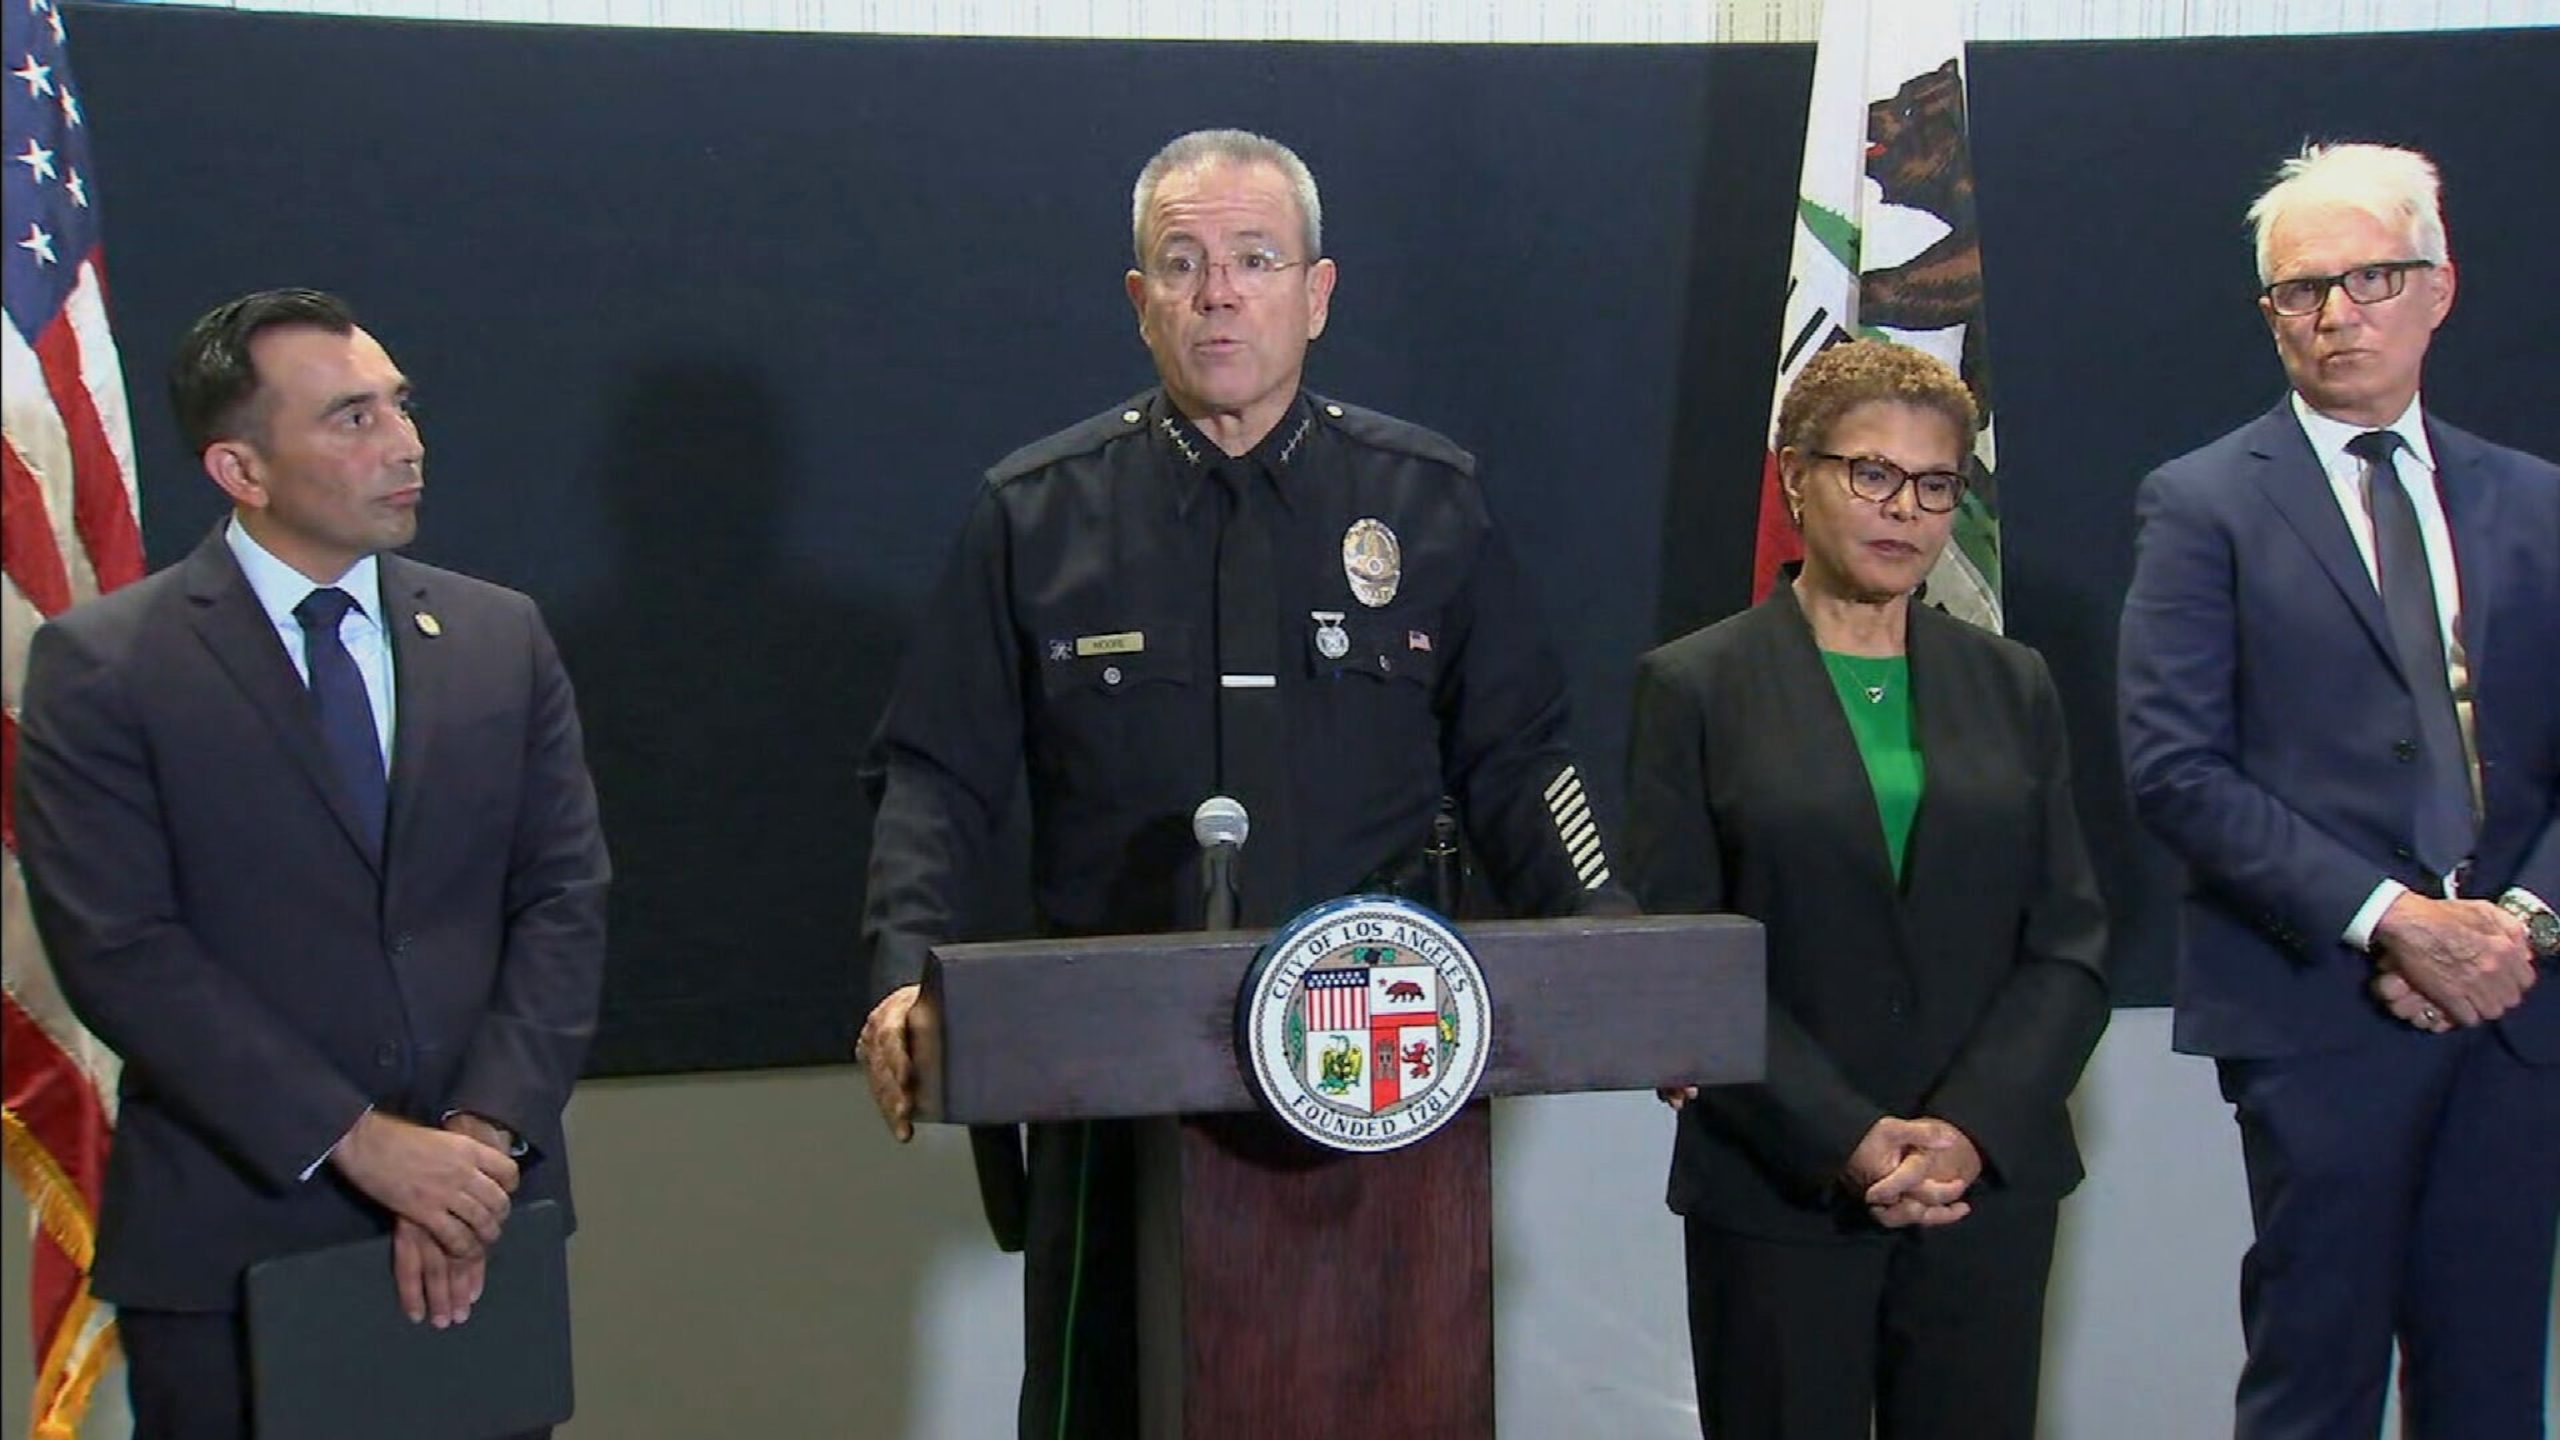 Police confirm that three homeless men in Los Angeles were tragically shot and killed, potentially by a serial killer.